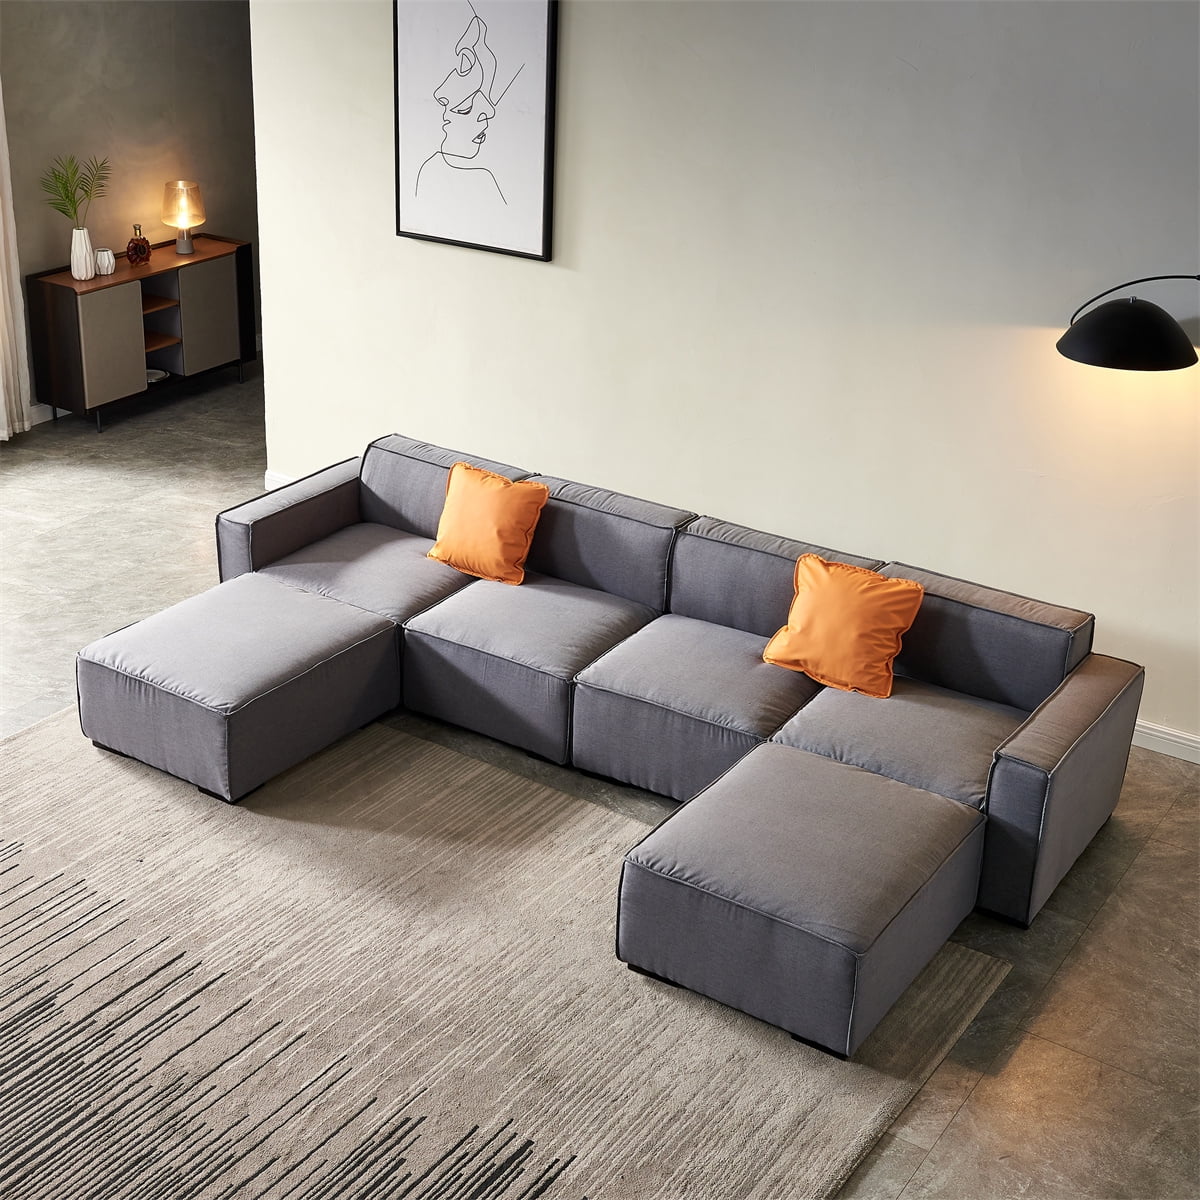 Modern Modular Sectional Couch with Extra-Soft Fabric, Convertible Sectional Sofa Couch with Single Seat, Two Ottoman, Armrest for Living Room, Office, U Shape Sectional Couch, Dark Gray - Walmart.com